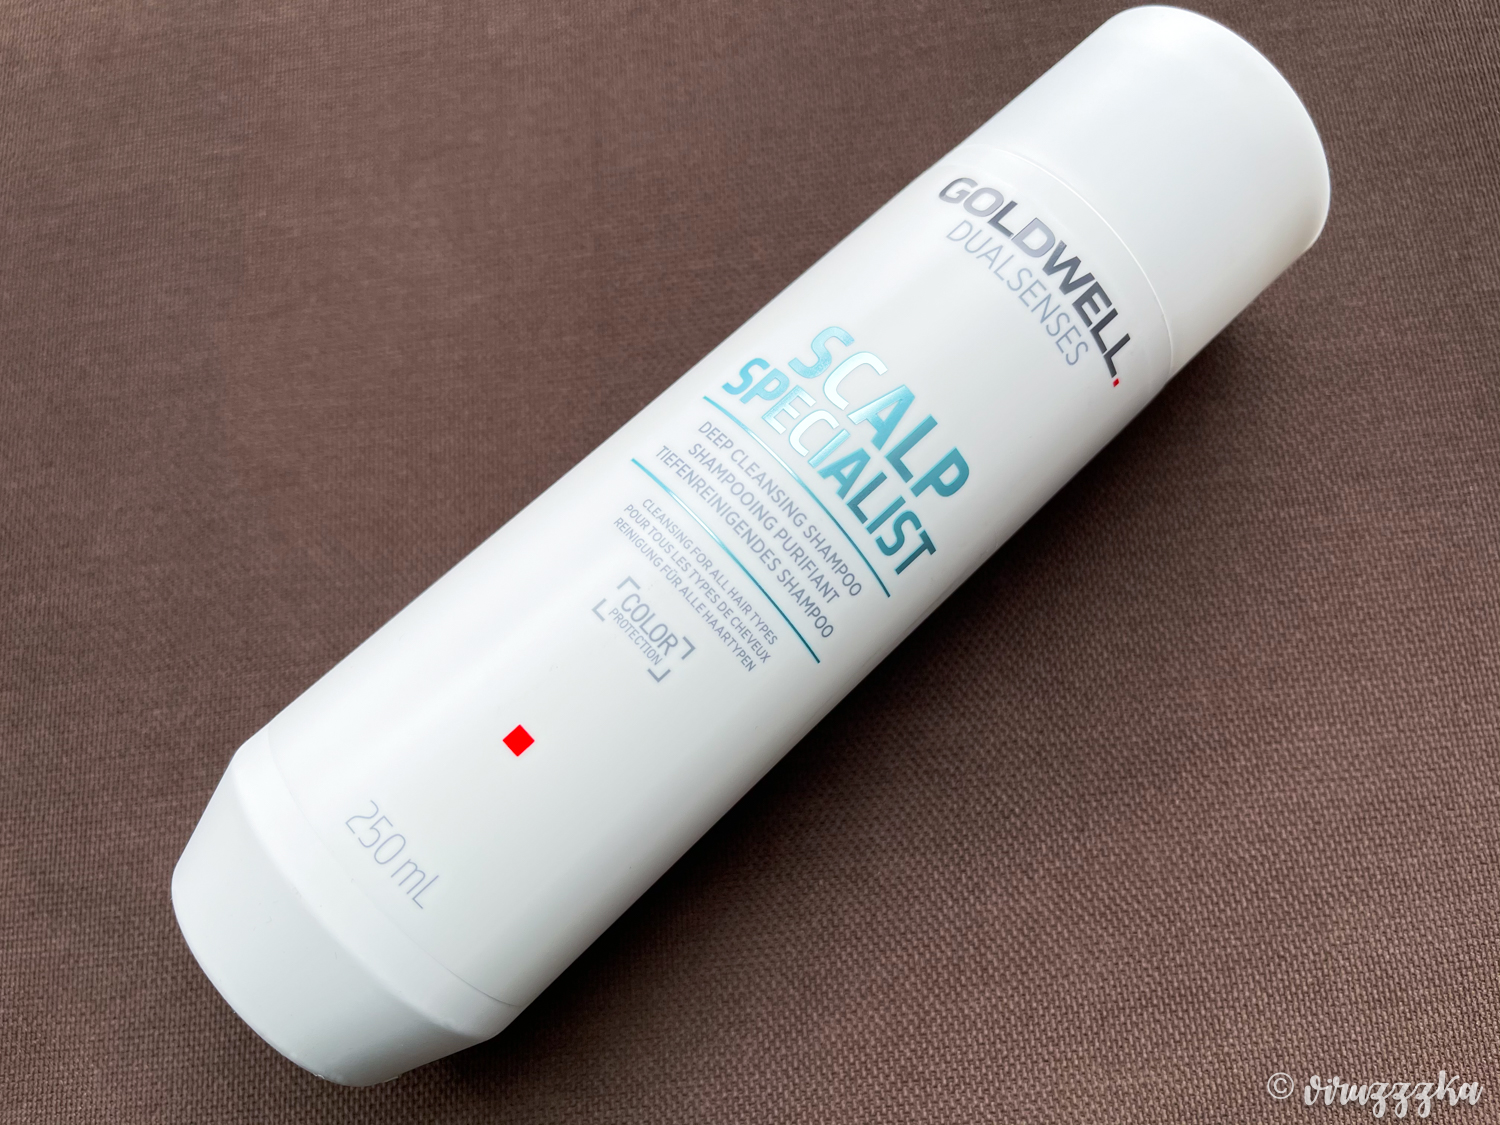 Goldwell Dualsenses Scalp Specialist Deep Cleansing Shampoo Review